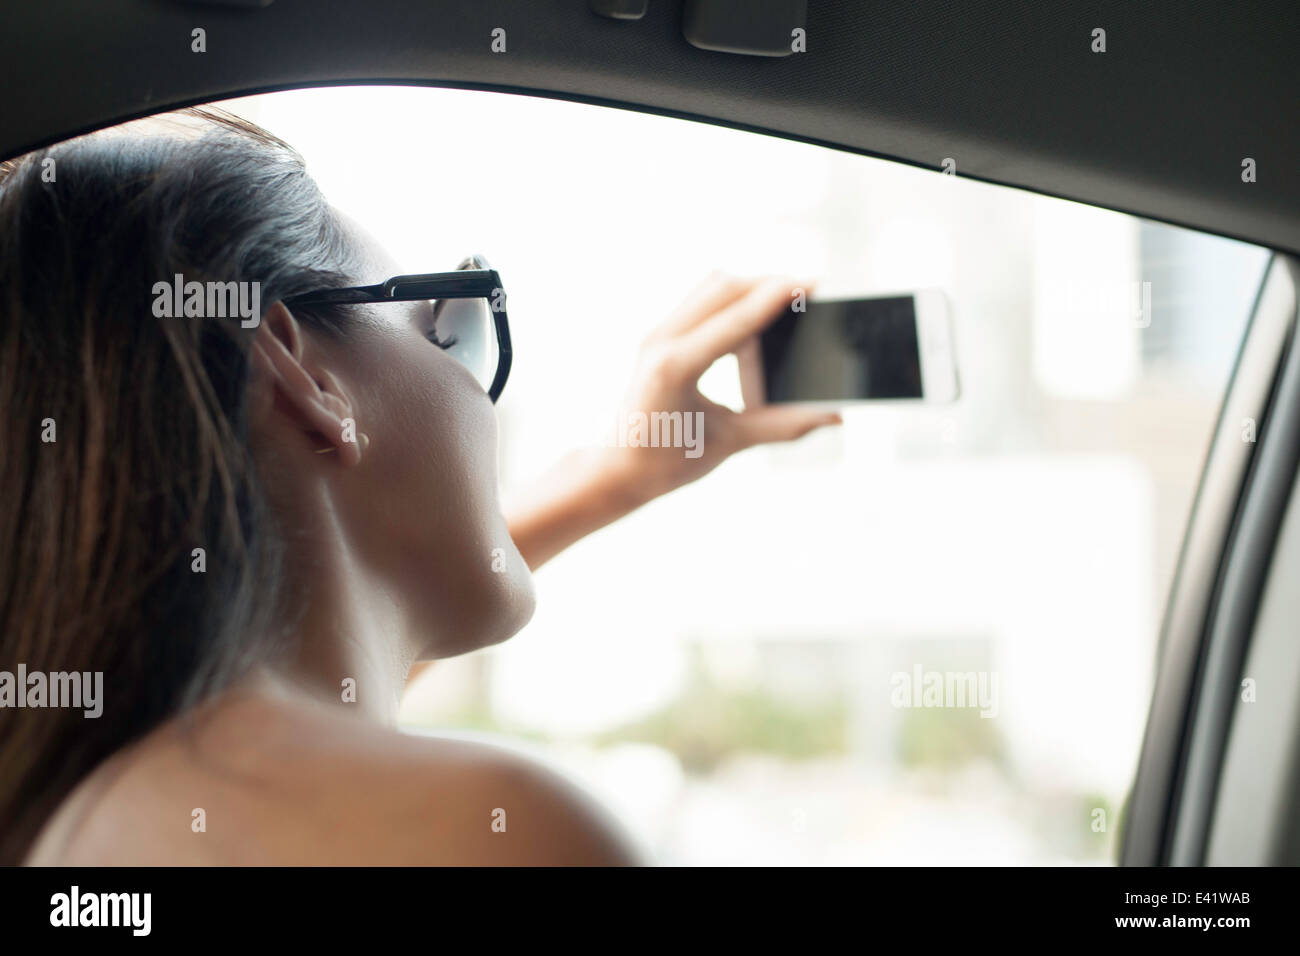 Young woman photographing with smartphone from taxi window Stock Photo